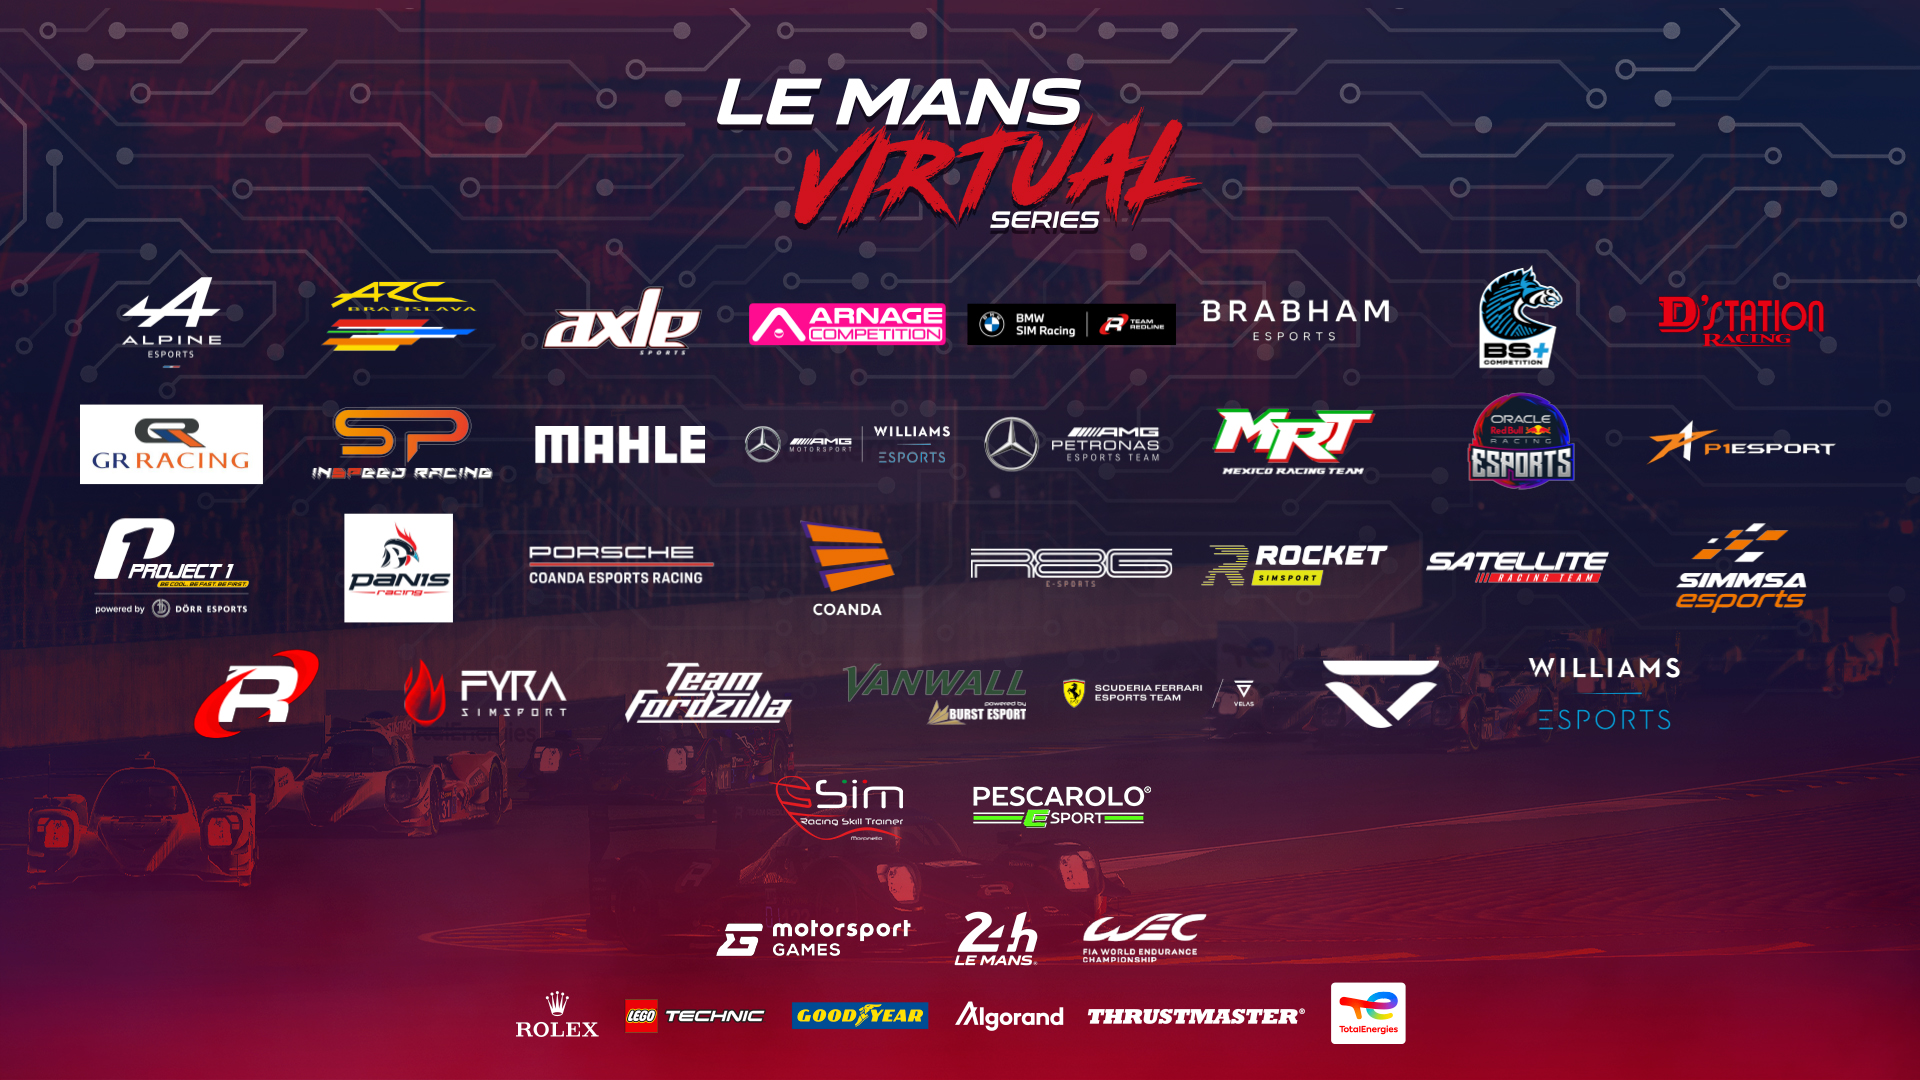 More information about "LIVE: 8 Hours of Bahrain Race - Le Mans Virtual Series 2022"